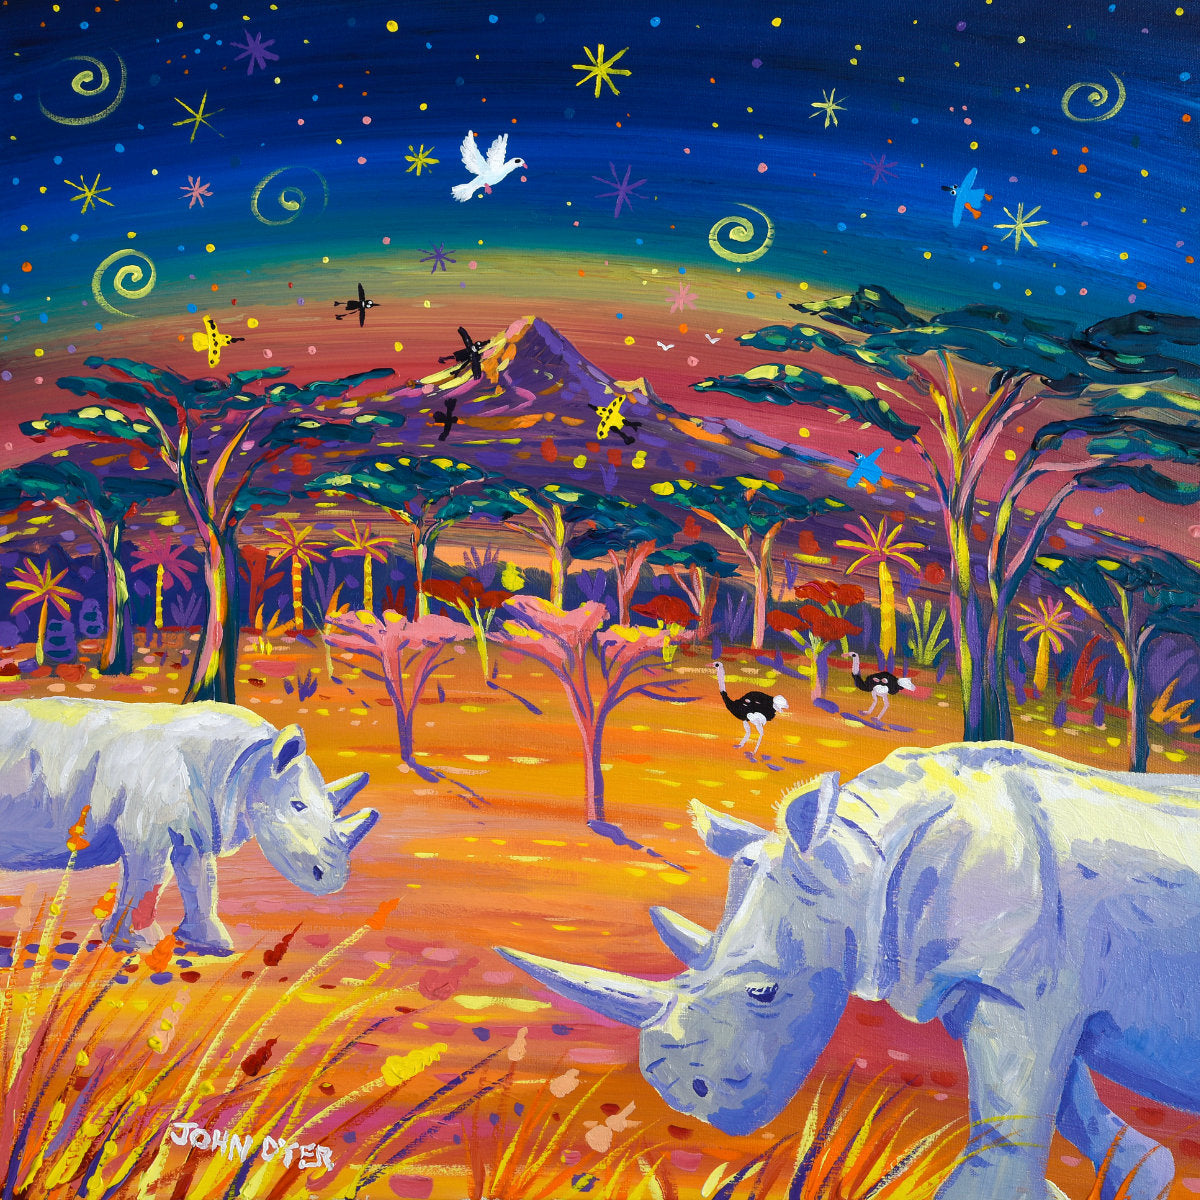 &#39;Rhinos in Paradise, Najin &amp; Fatu, the Last Two Northern White Rhino&#39;, 24x24 inches acrylic on canvas. African Painting by British Artist John Dyer.